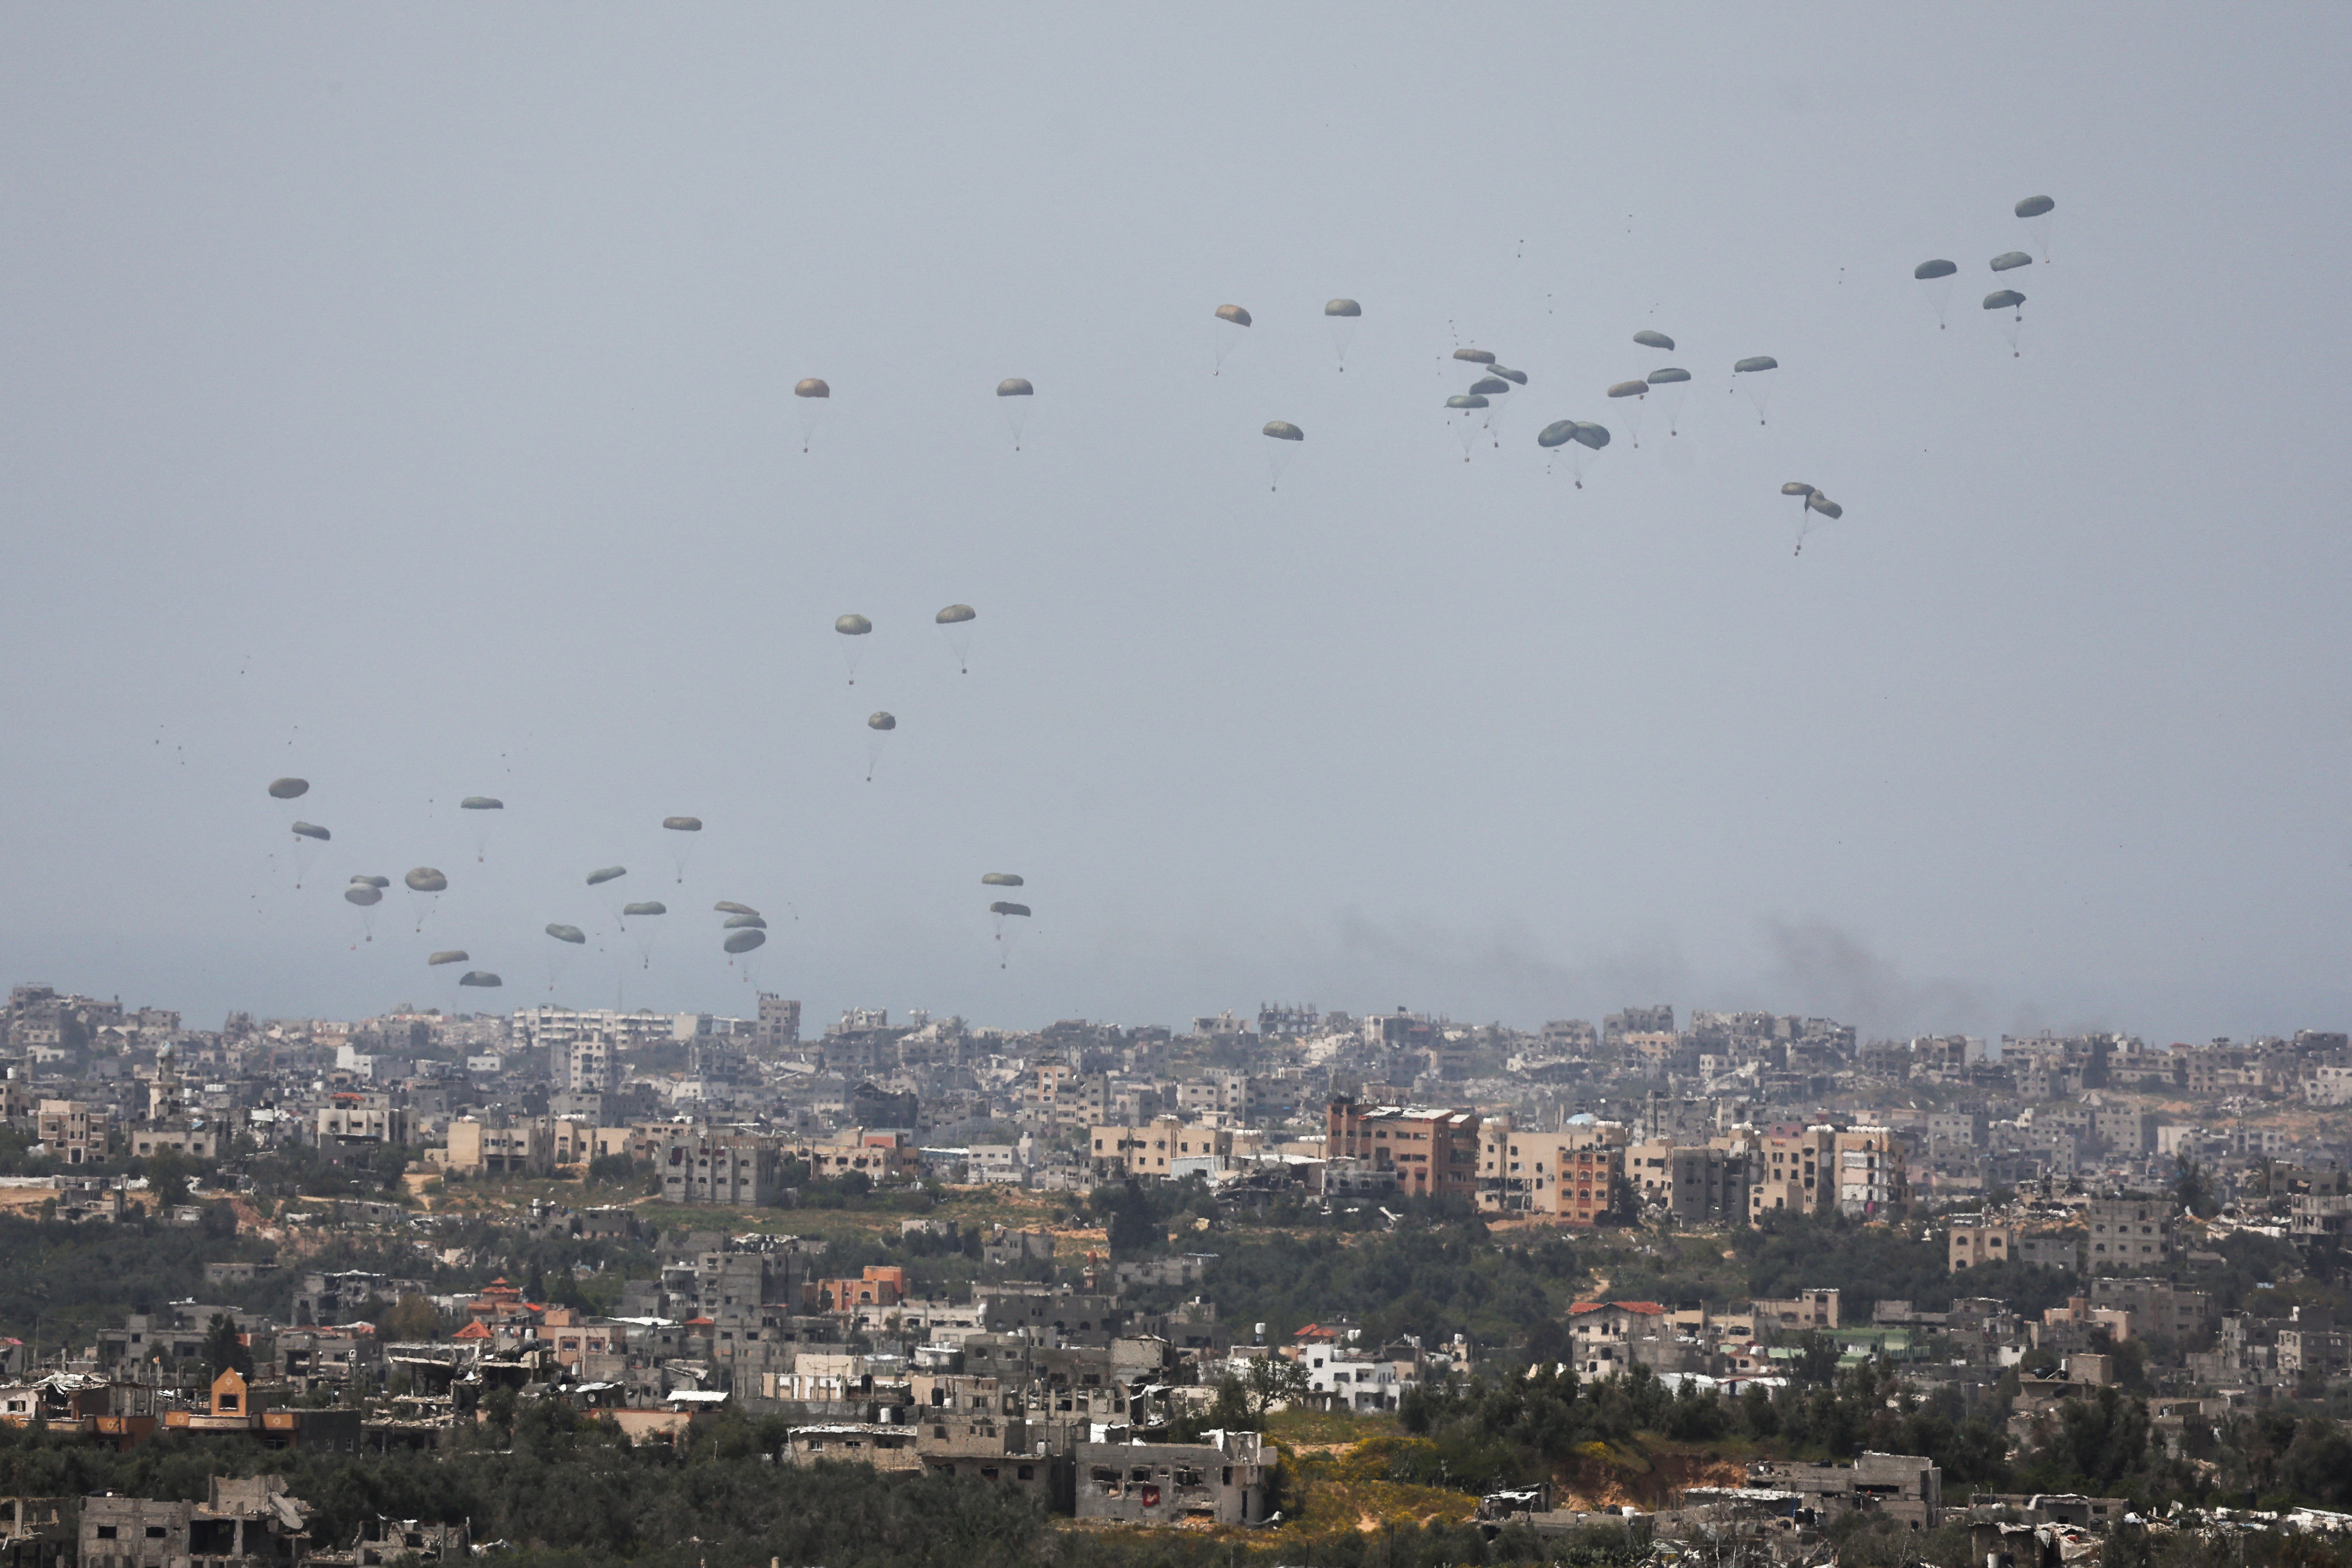 Humanitarian aid falls through the sky towards the Gaza Strip, as seen from Israel